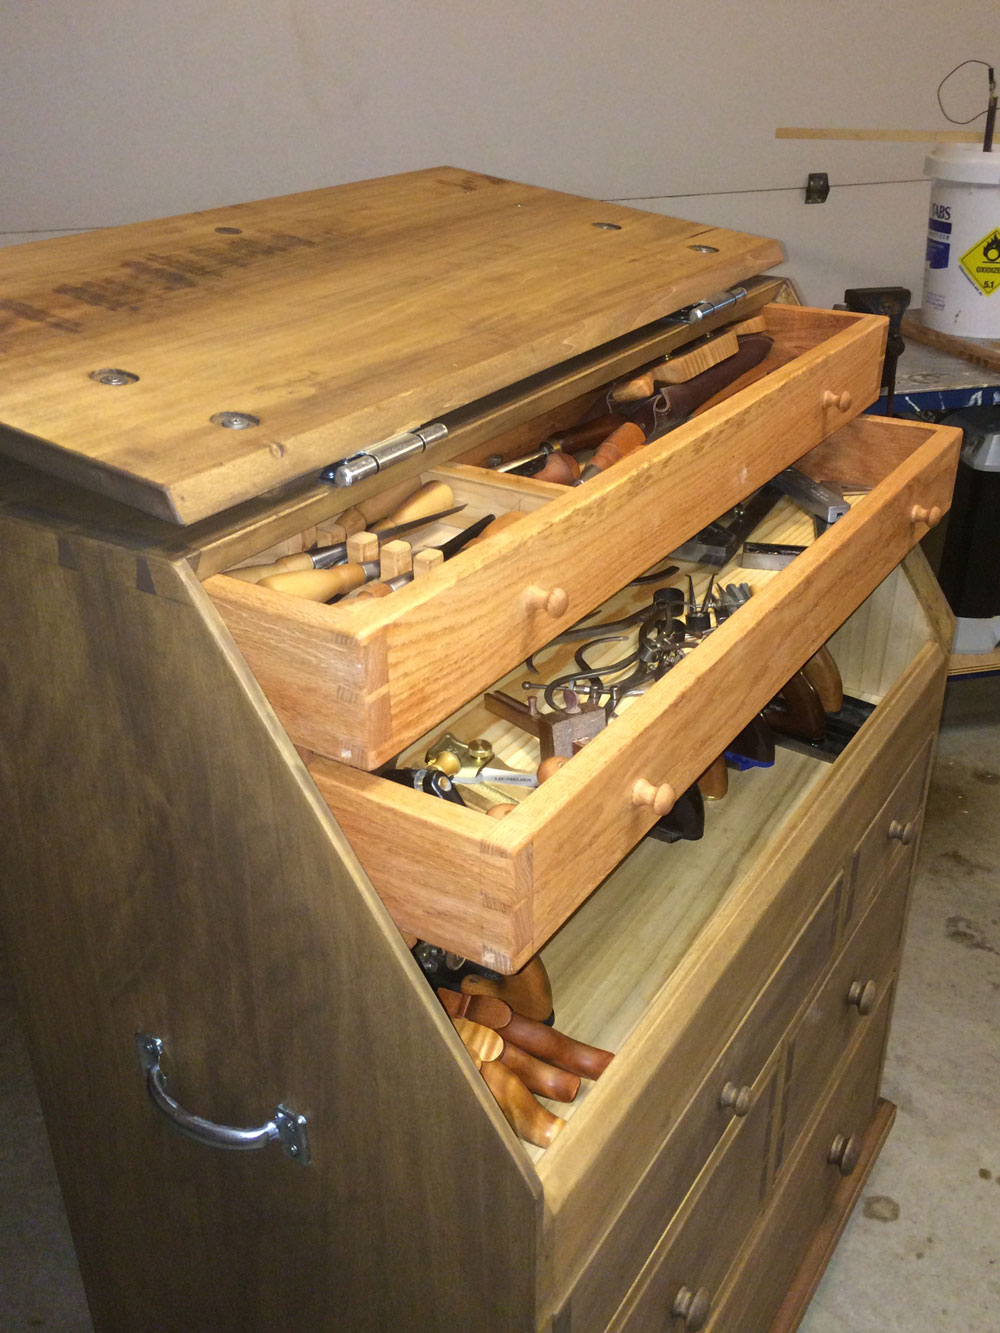 The Slant-lid Tool Chest Popular Woodworking Magazine